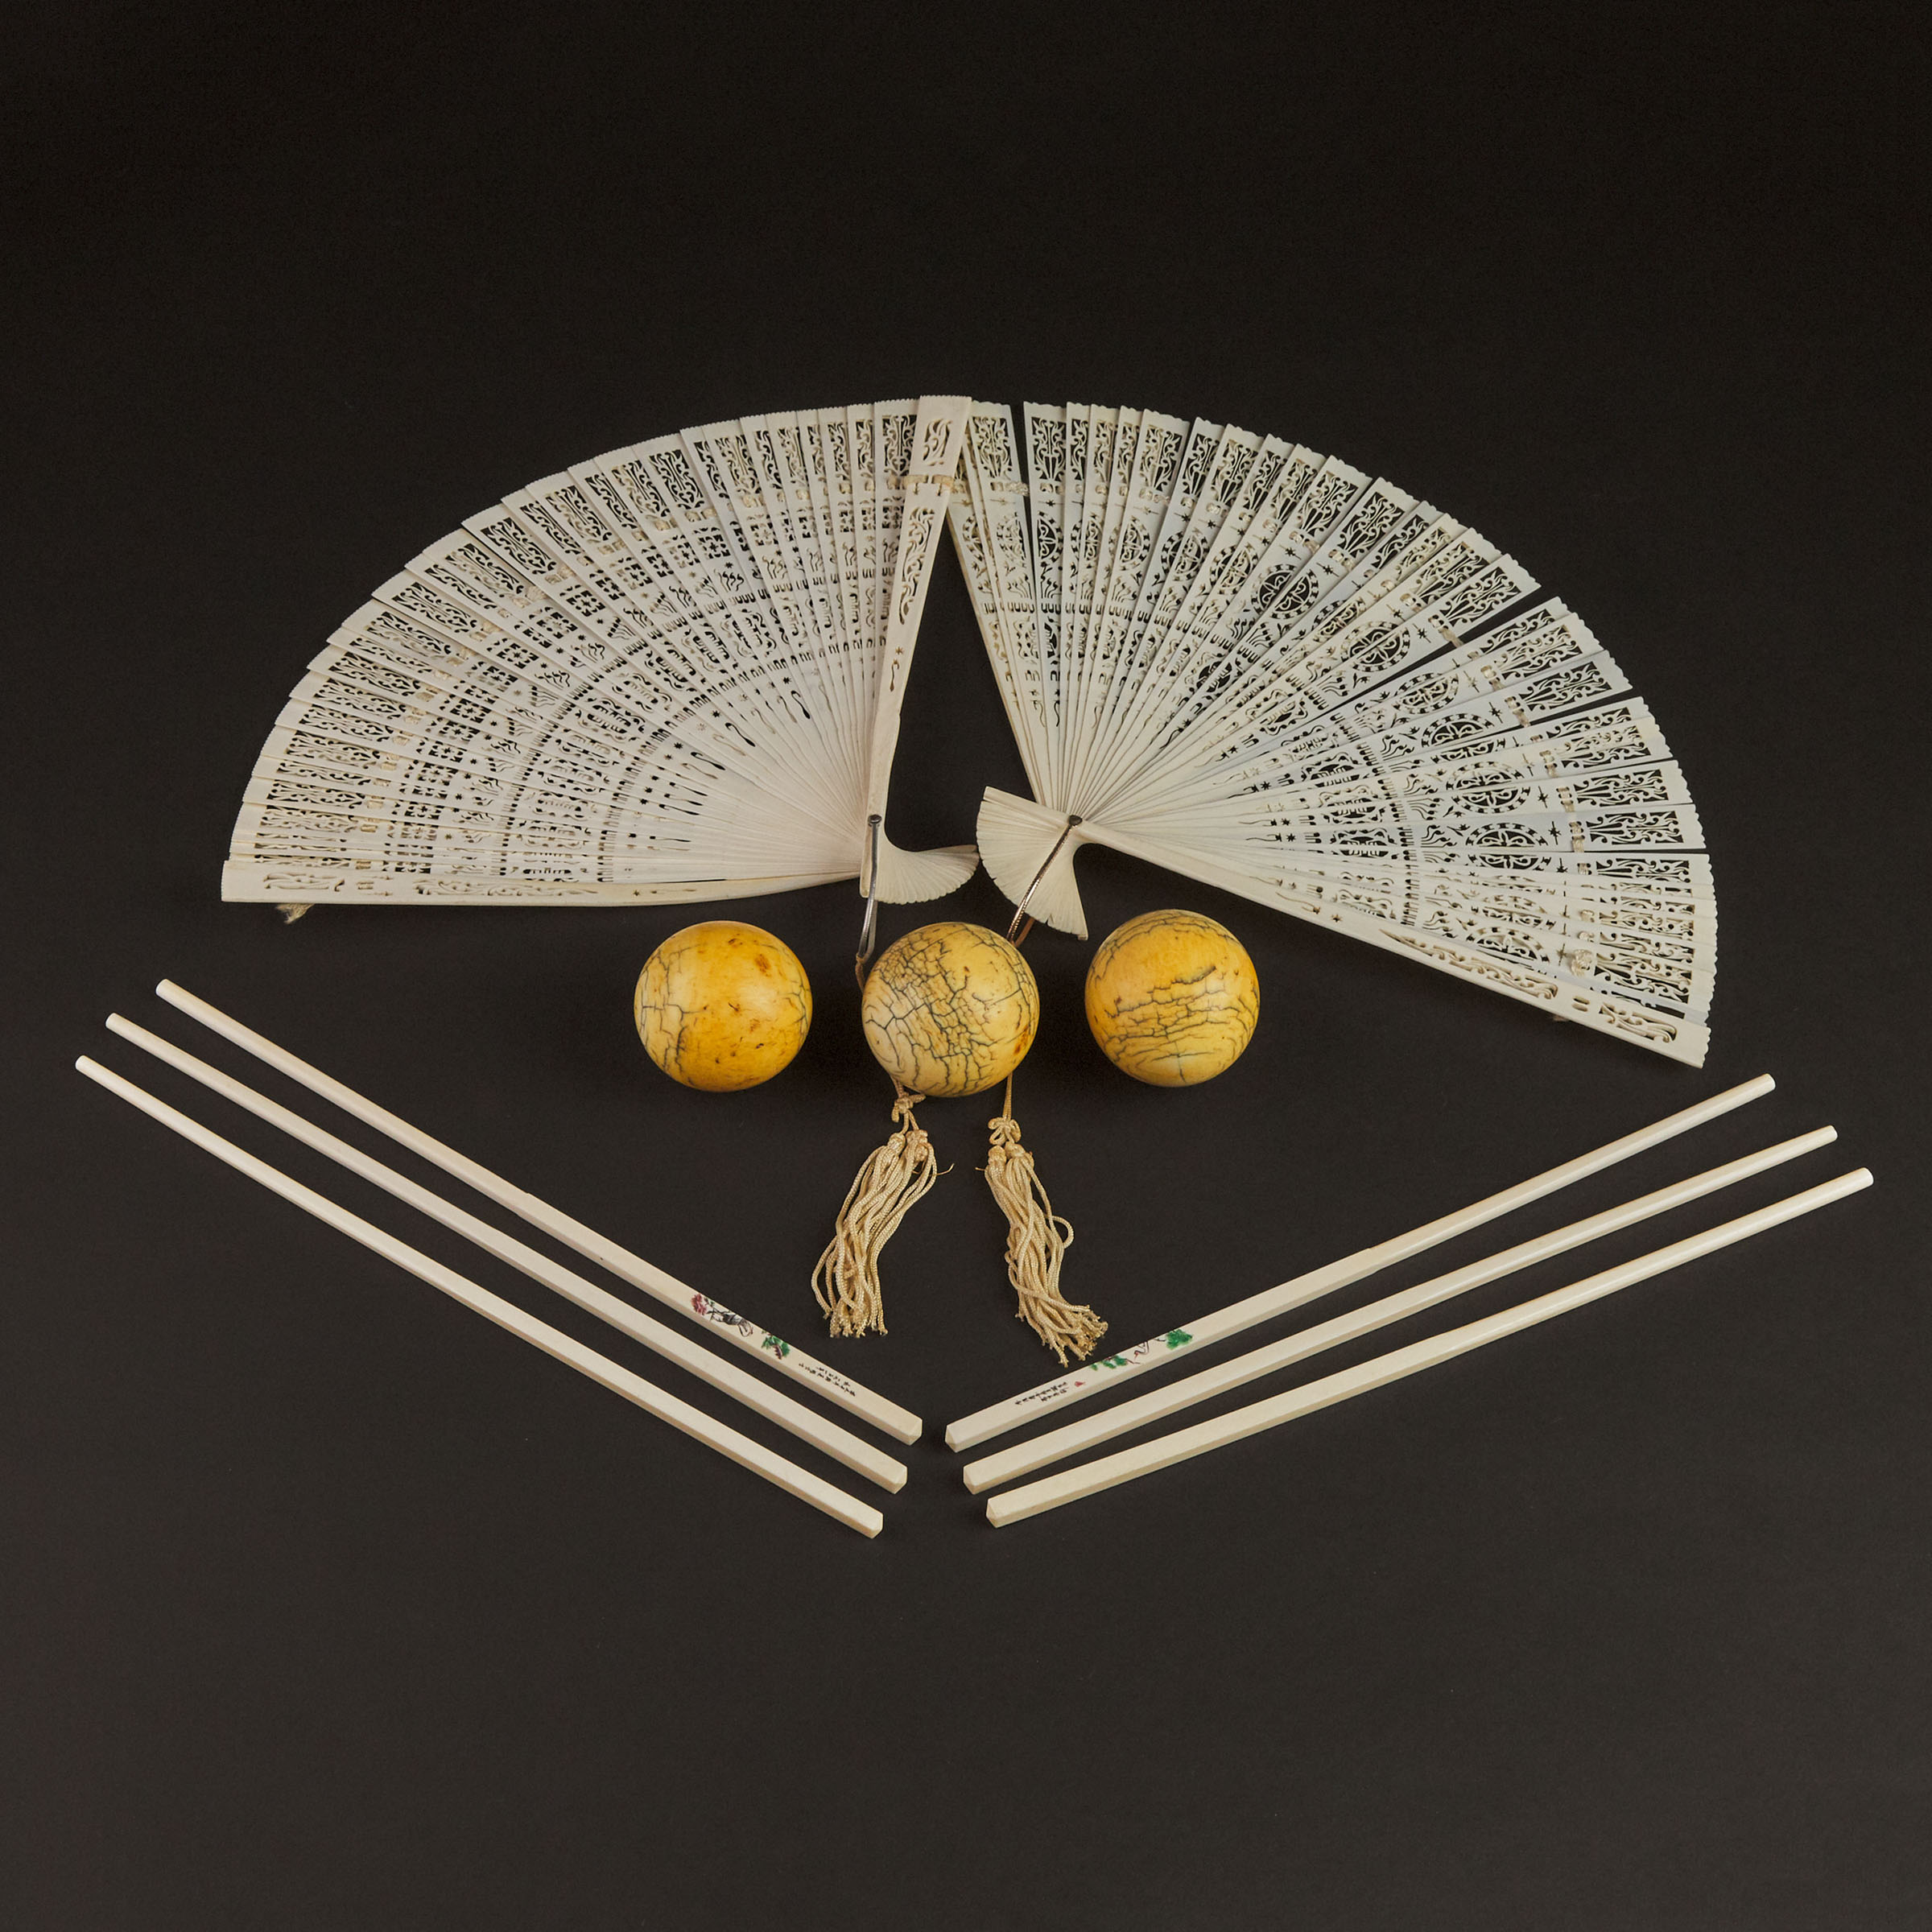 Two Ivory Fans, Three Billiard Balls, and Three Pairs of Chopsticks, Early to Mid 20th Century